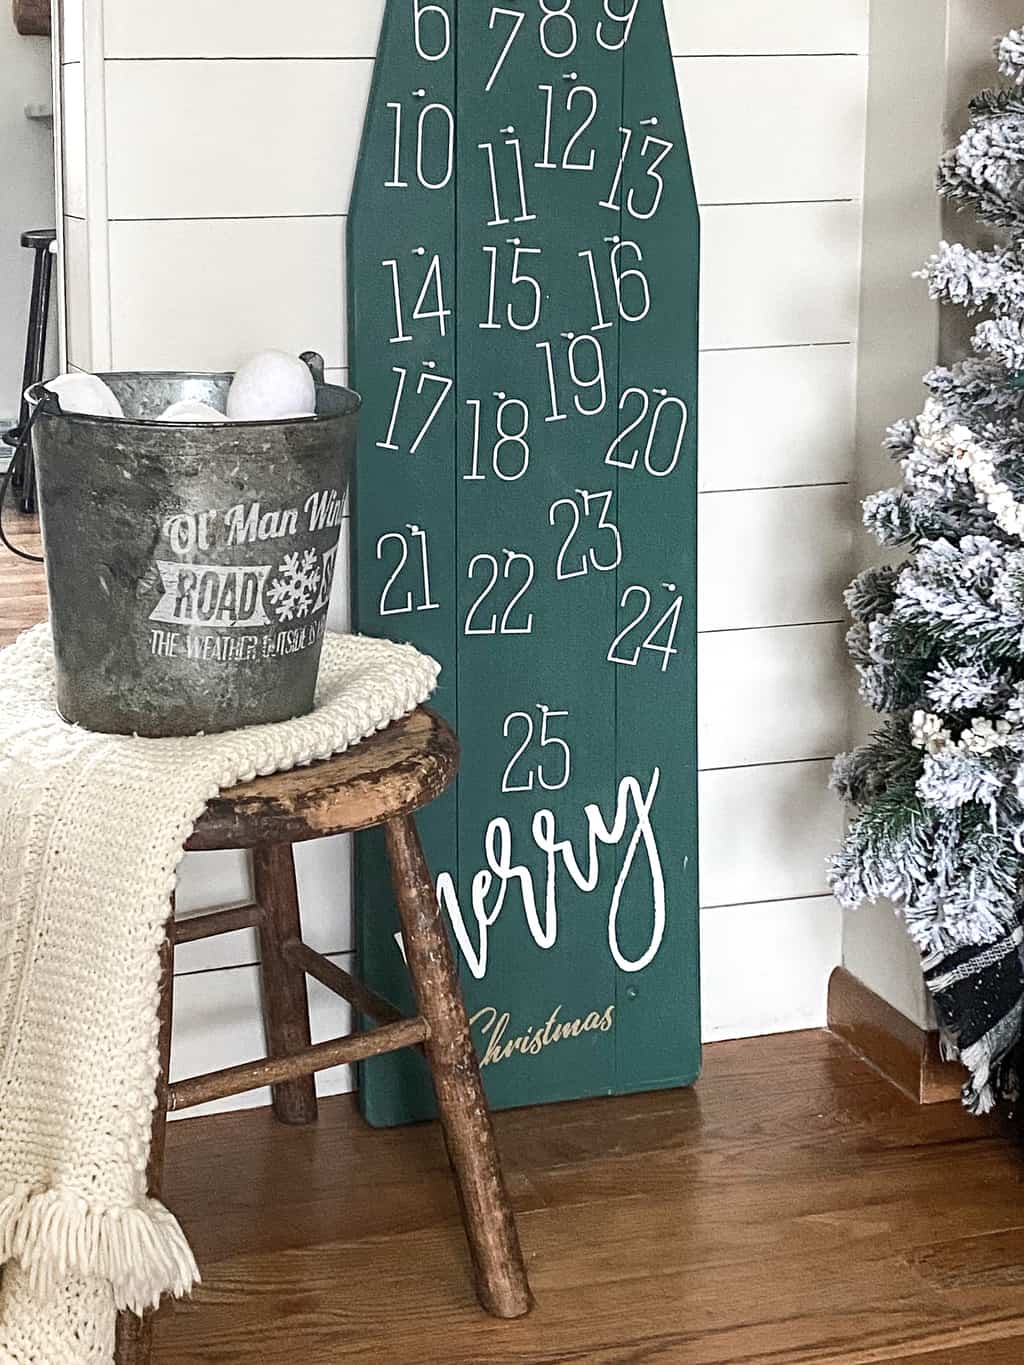 DIY Christmas Countdown - repurpose an old, wood ironing board into something festive for the holiday season that can be used for years and years.